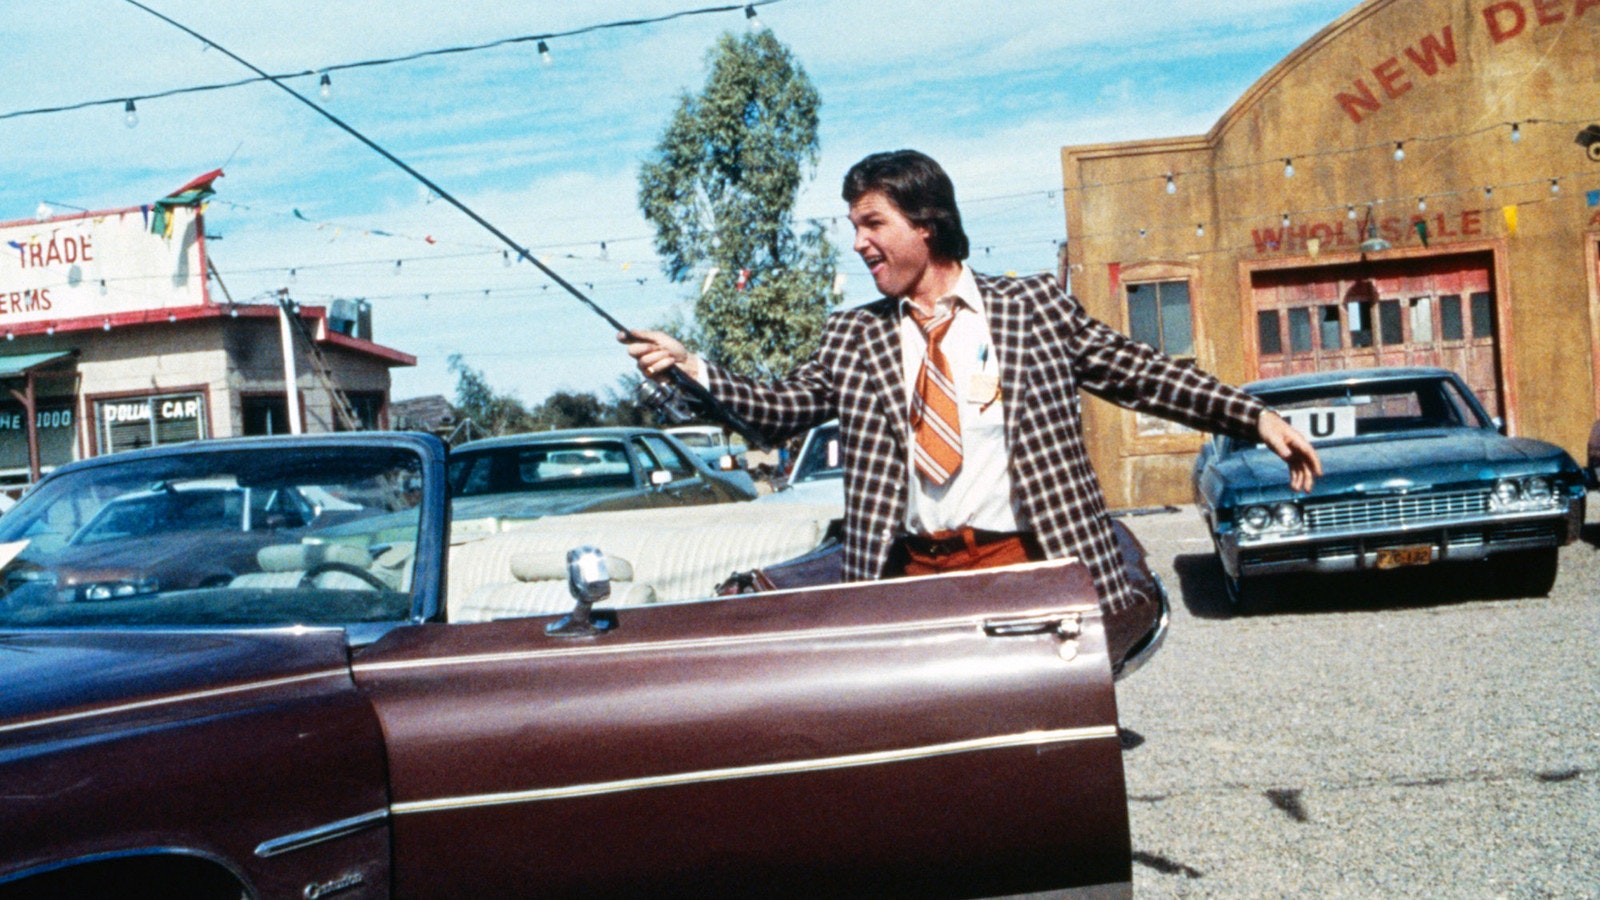 Used Cars (1980)
Directted by Robert Zemeckis
Shown: Kurt Russell